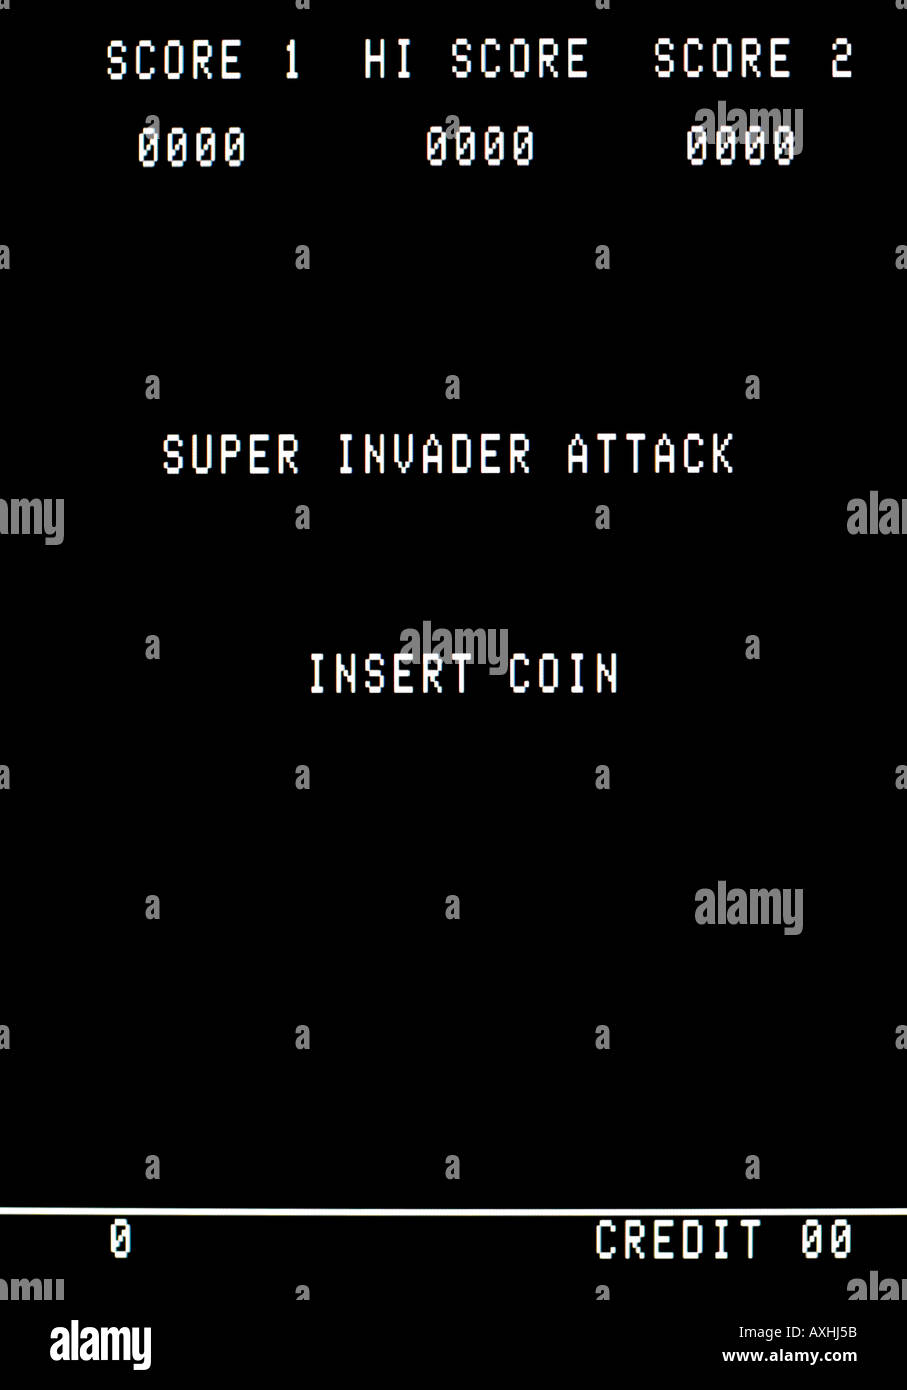 Super Invader Attack Zaccaria Zelco 1978 Vintage arcade videogame screen shot - EDITORIAL USE ONLY Stock Photo